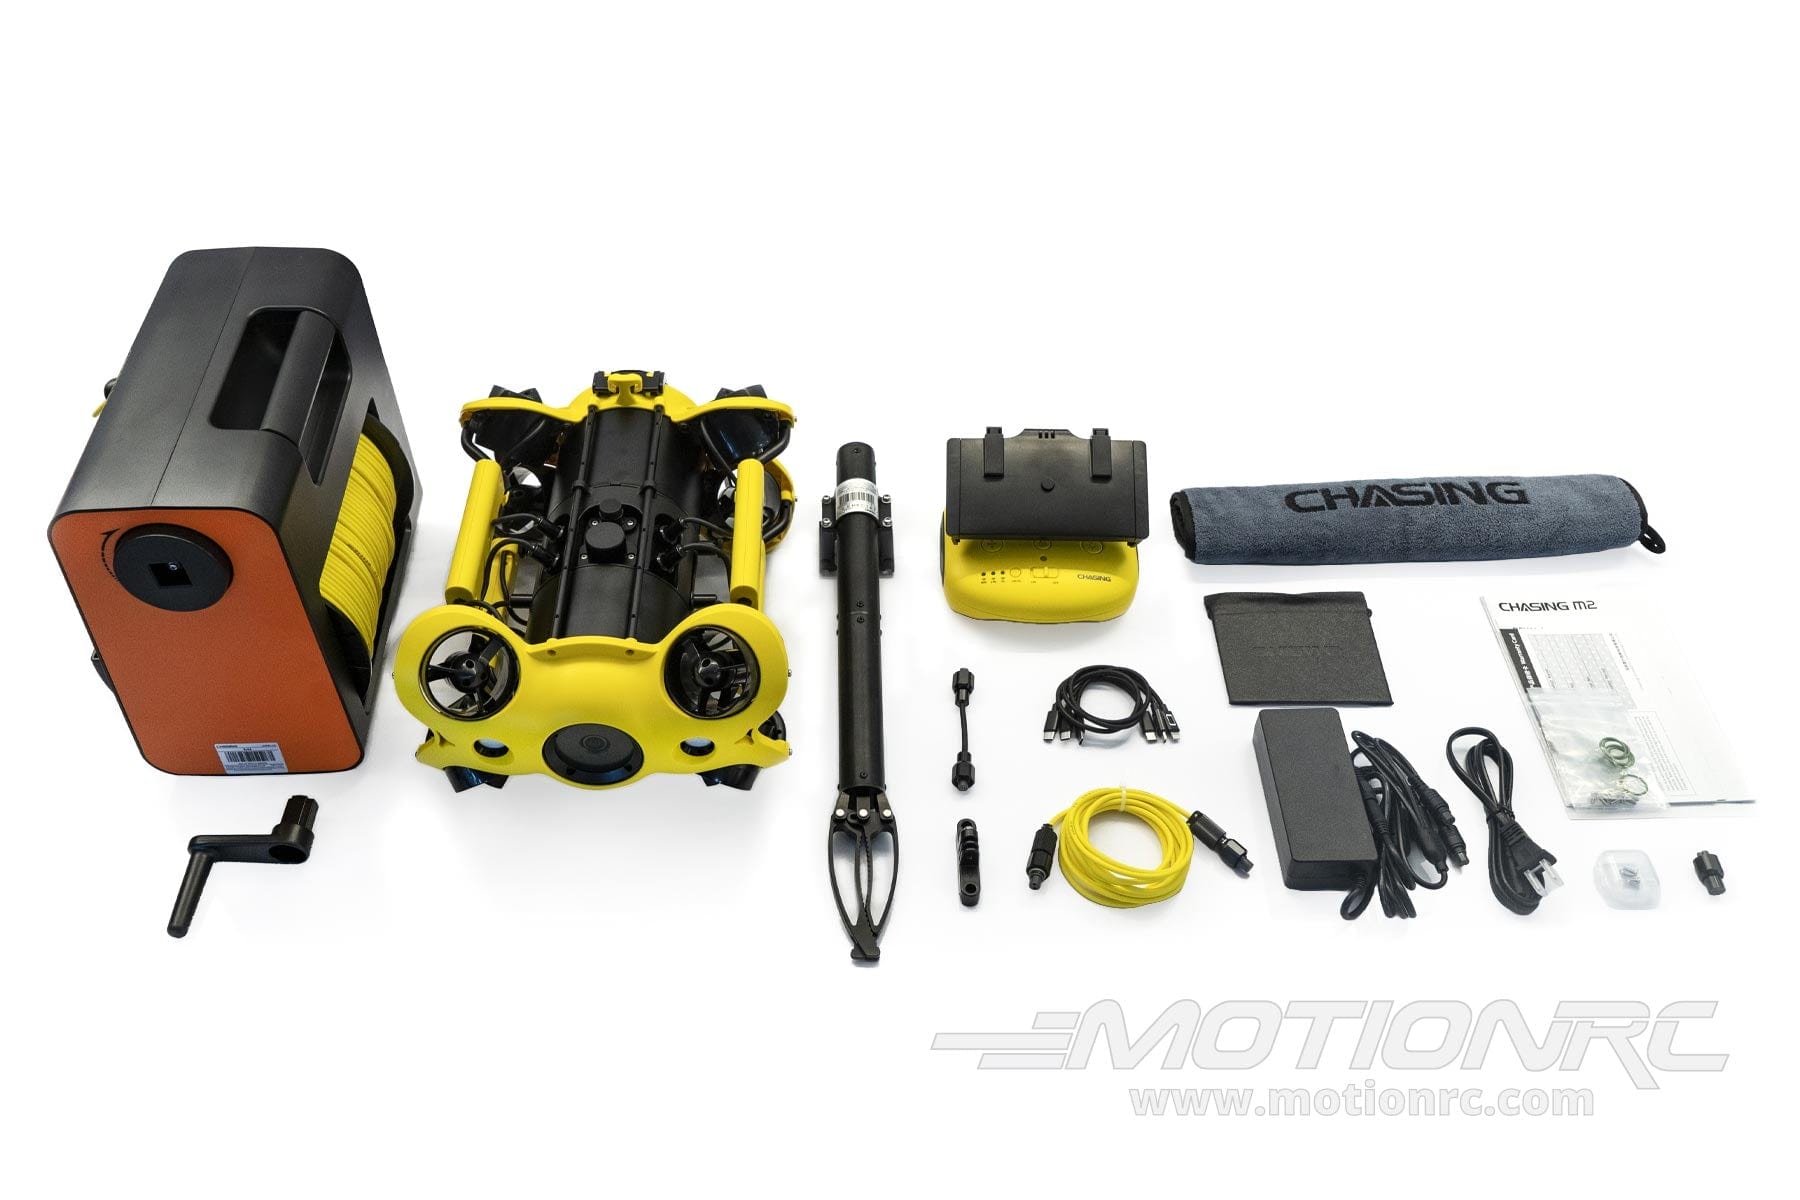 Chasing M2 Professional Submersible ROV with 200M Tether, Manual Reel, Grabber Claw, Trolley Case and 4K Video - RTR